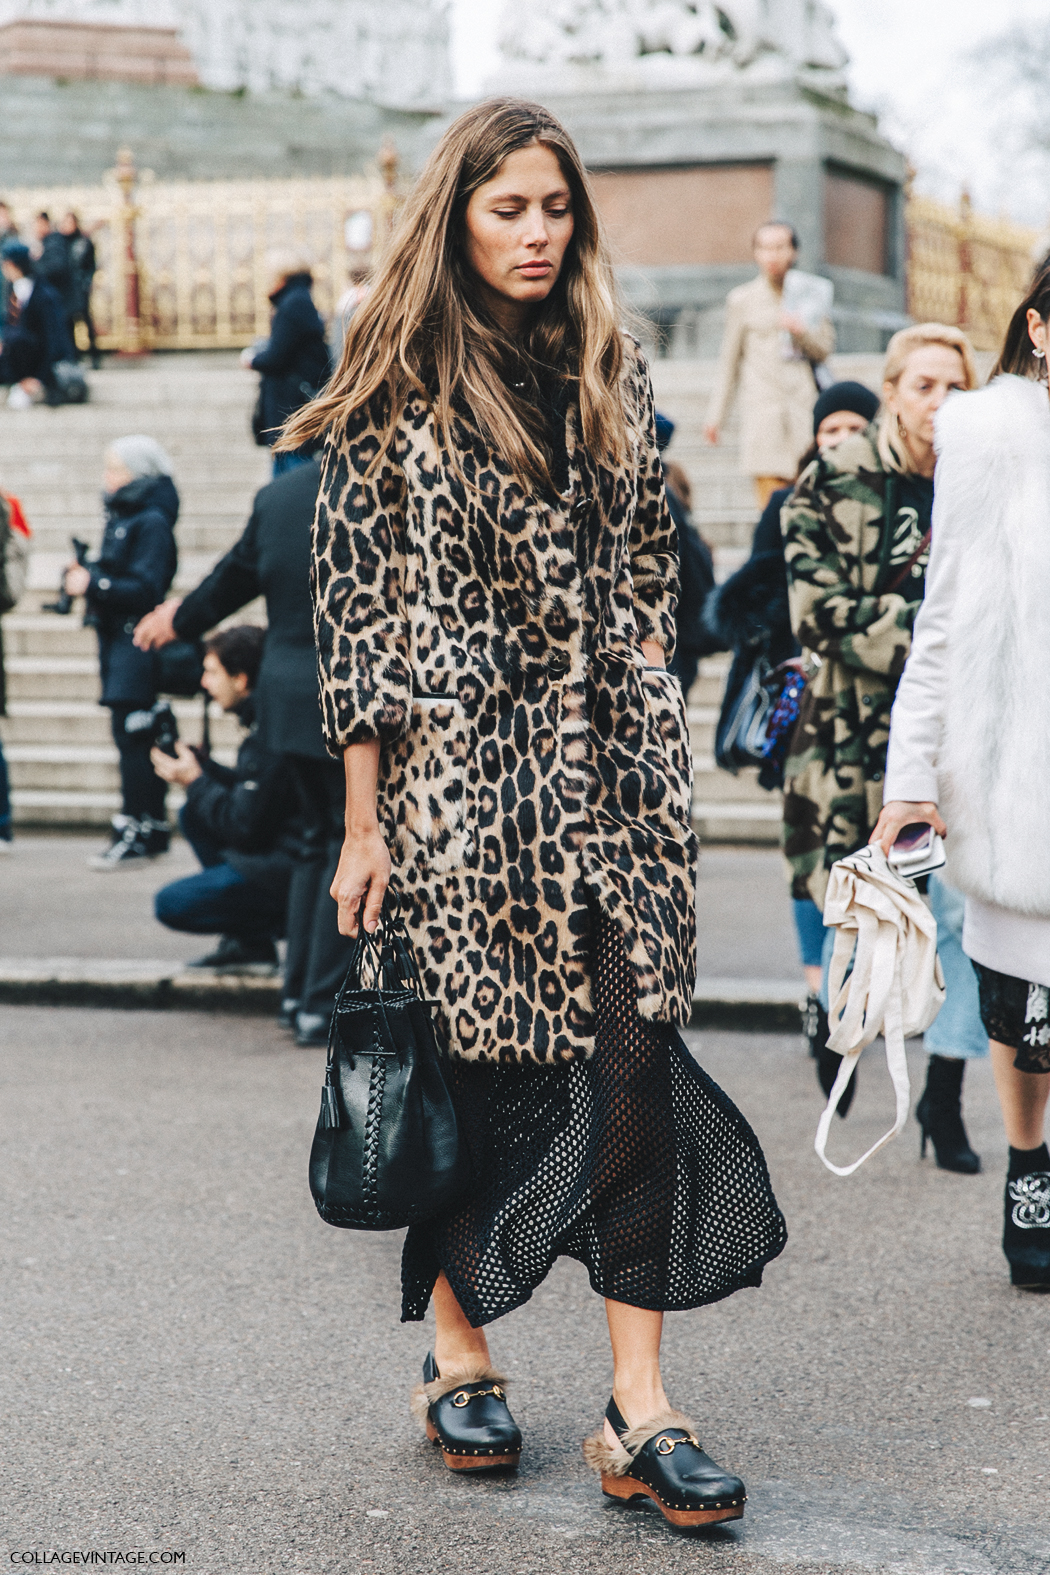 LFW-London_Fashion_Week_Fall_16-Street_Style-Collage_Vintage-Leopard_Coat-Gucci-Clogs-